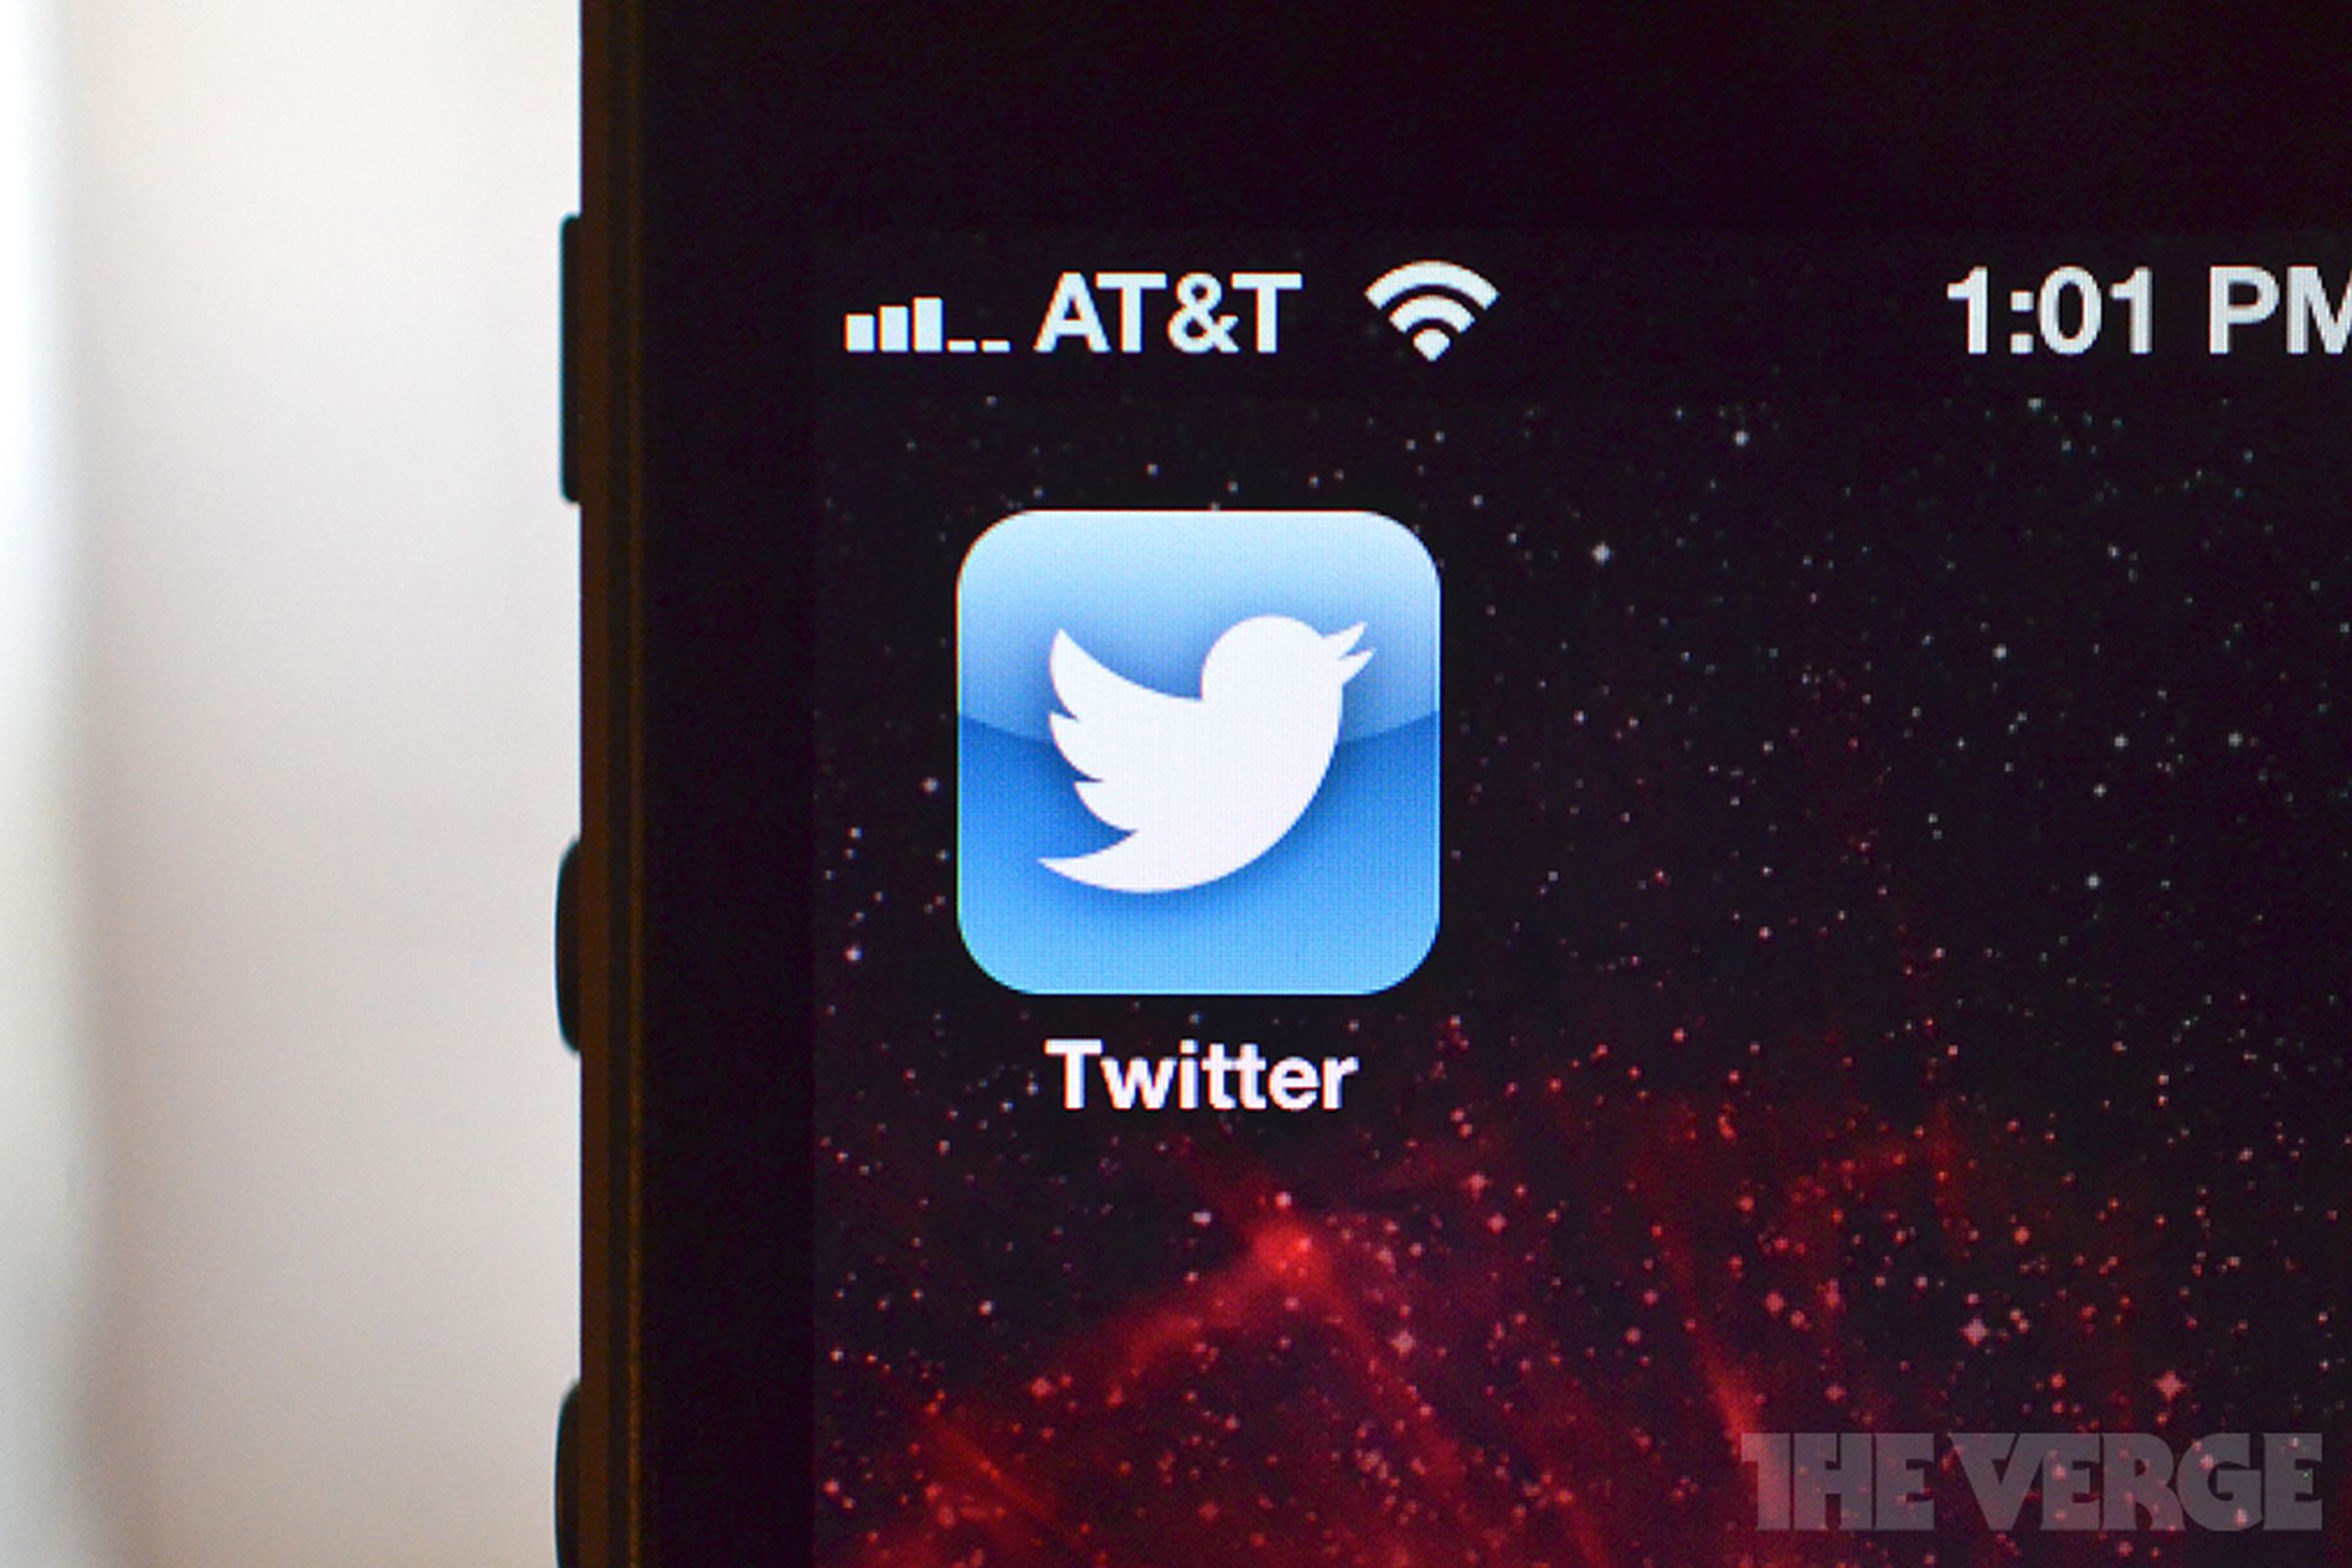 Twitter for iOS app icon